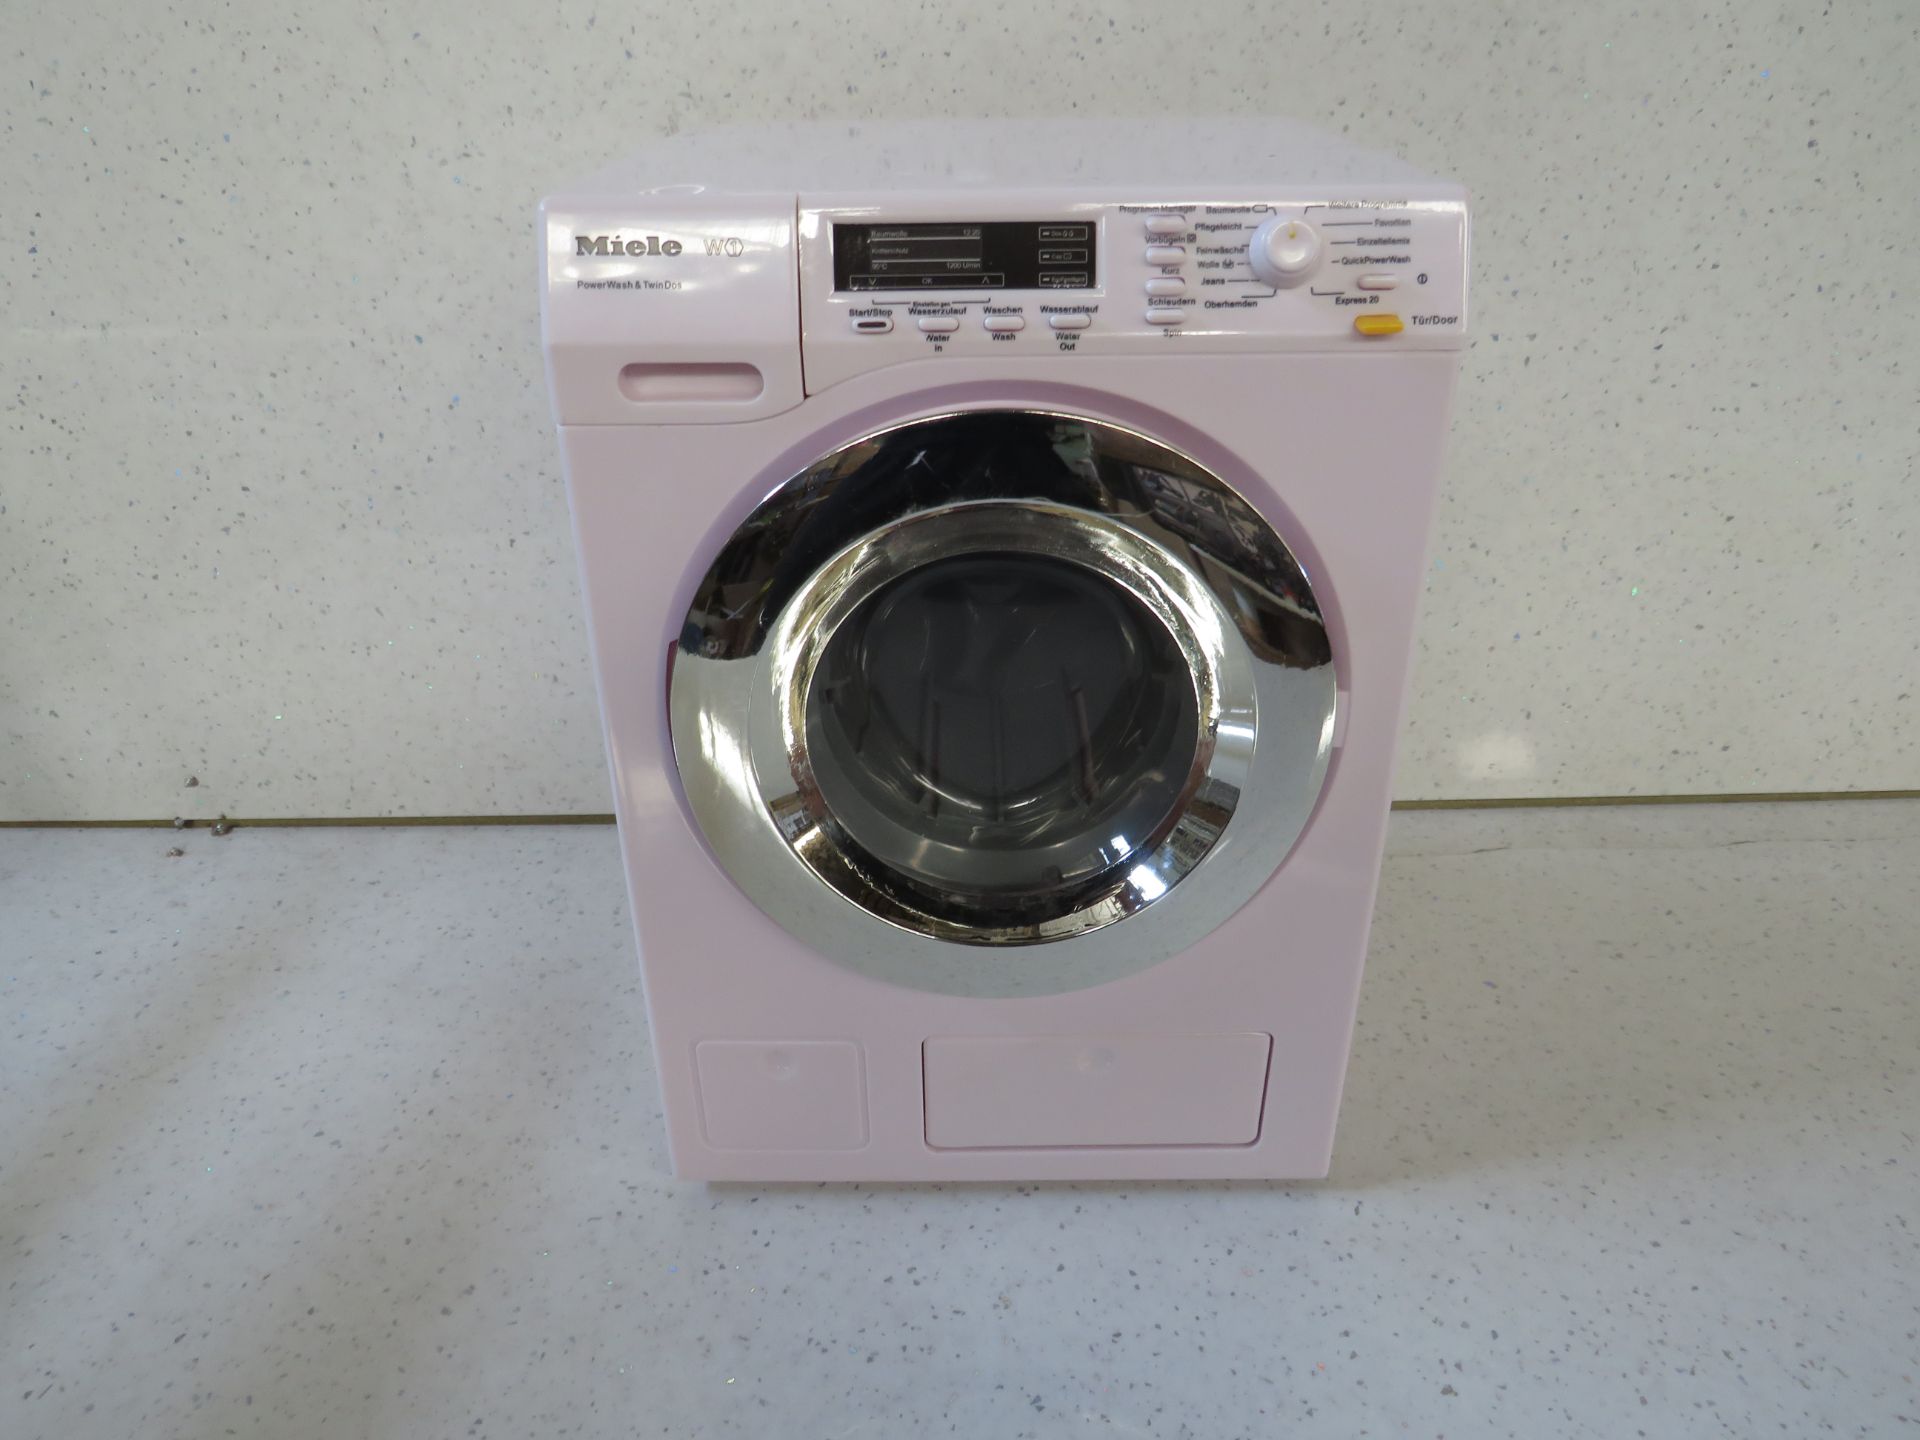 Klein - Miele Washing Machine Toy - Unchecked & Boxed.